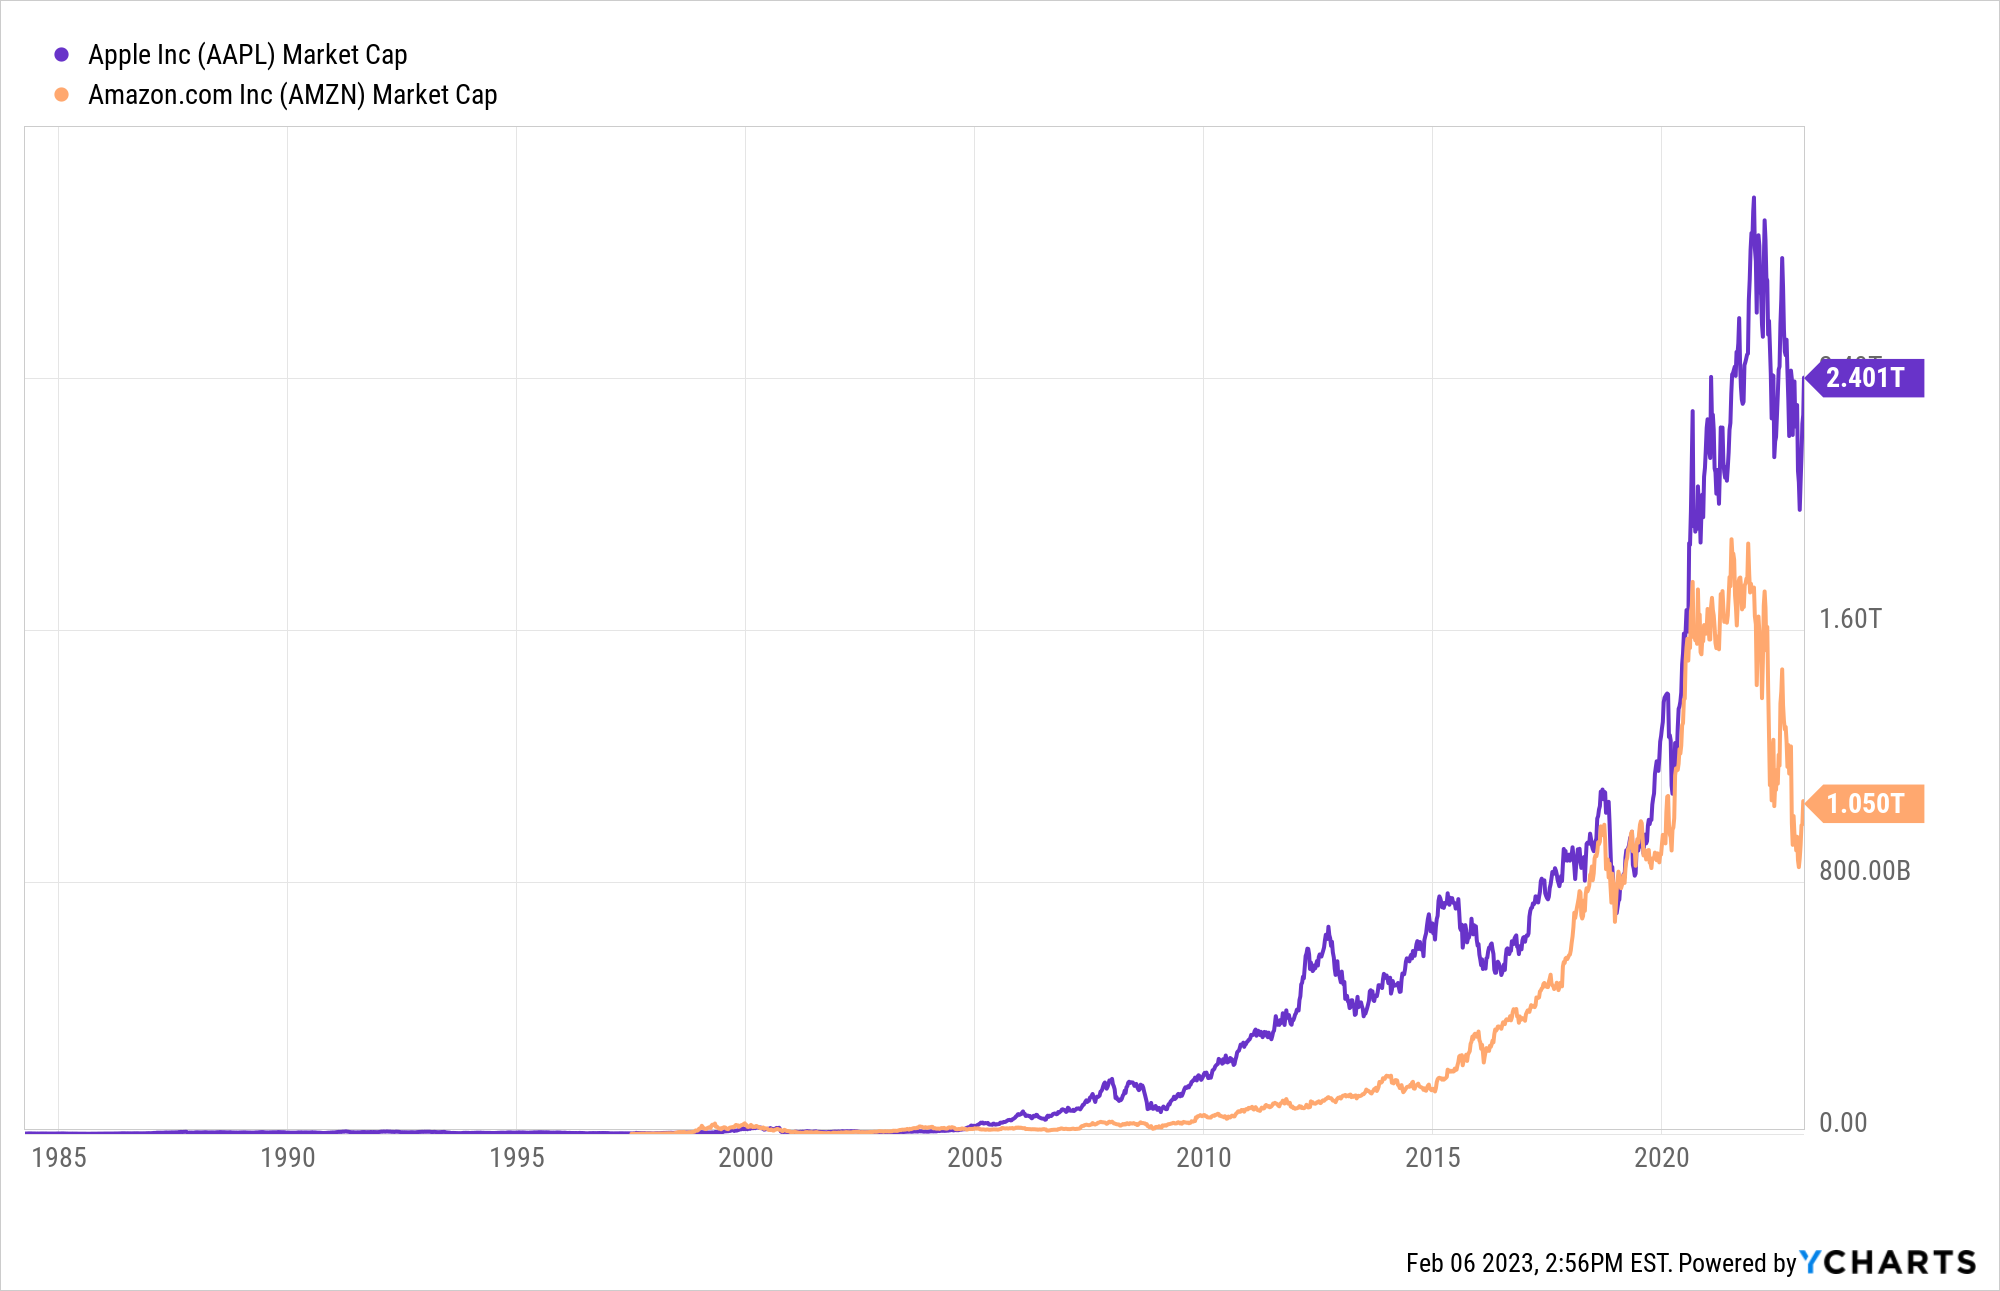 A graph showing the change in AAPL and AMZN stocks' market cap over time